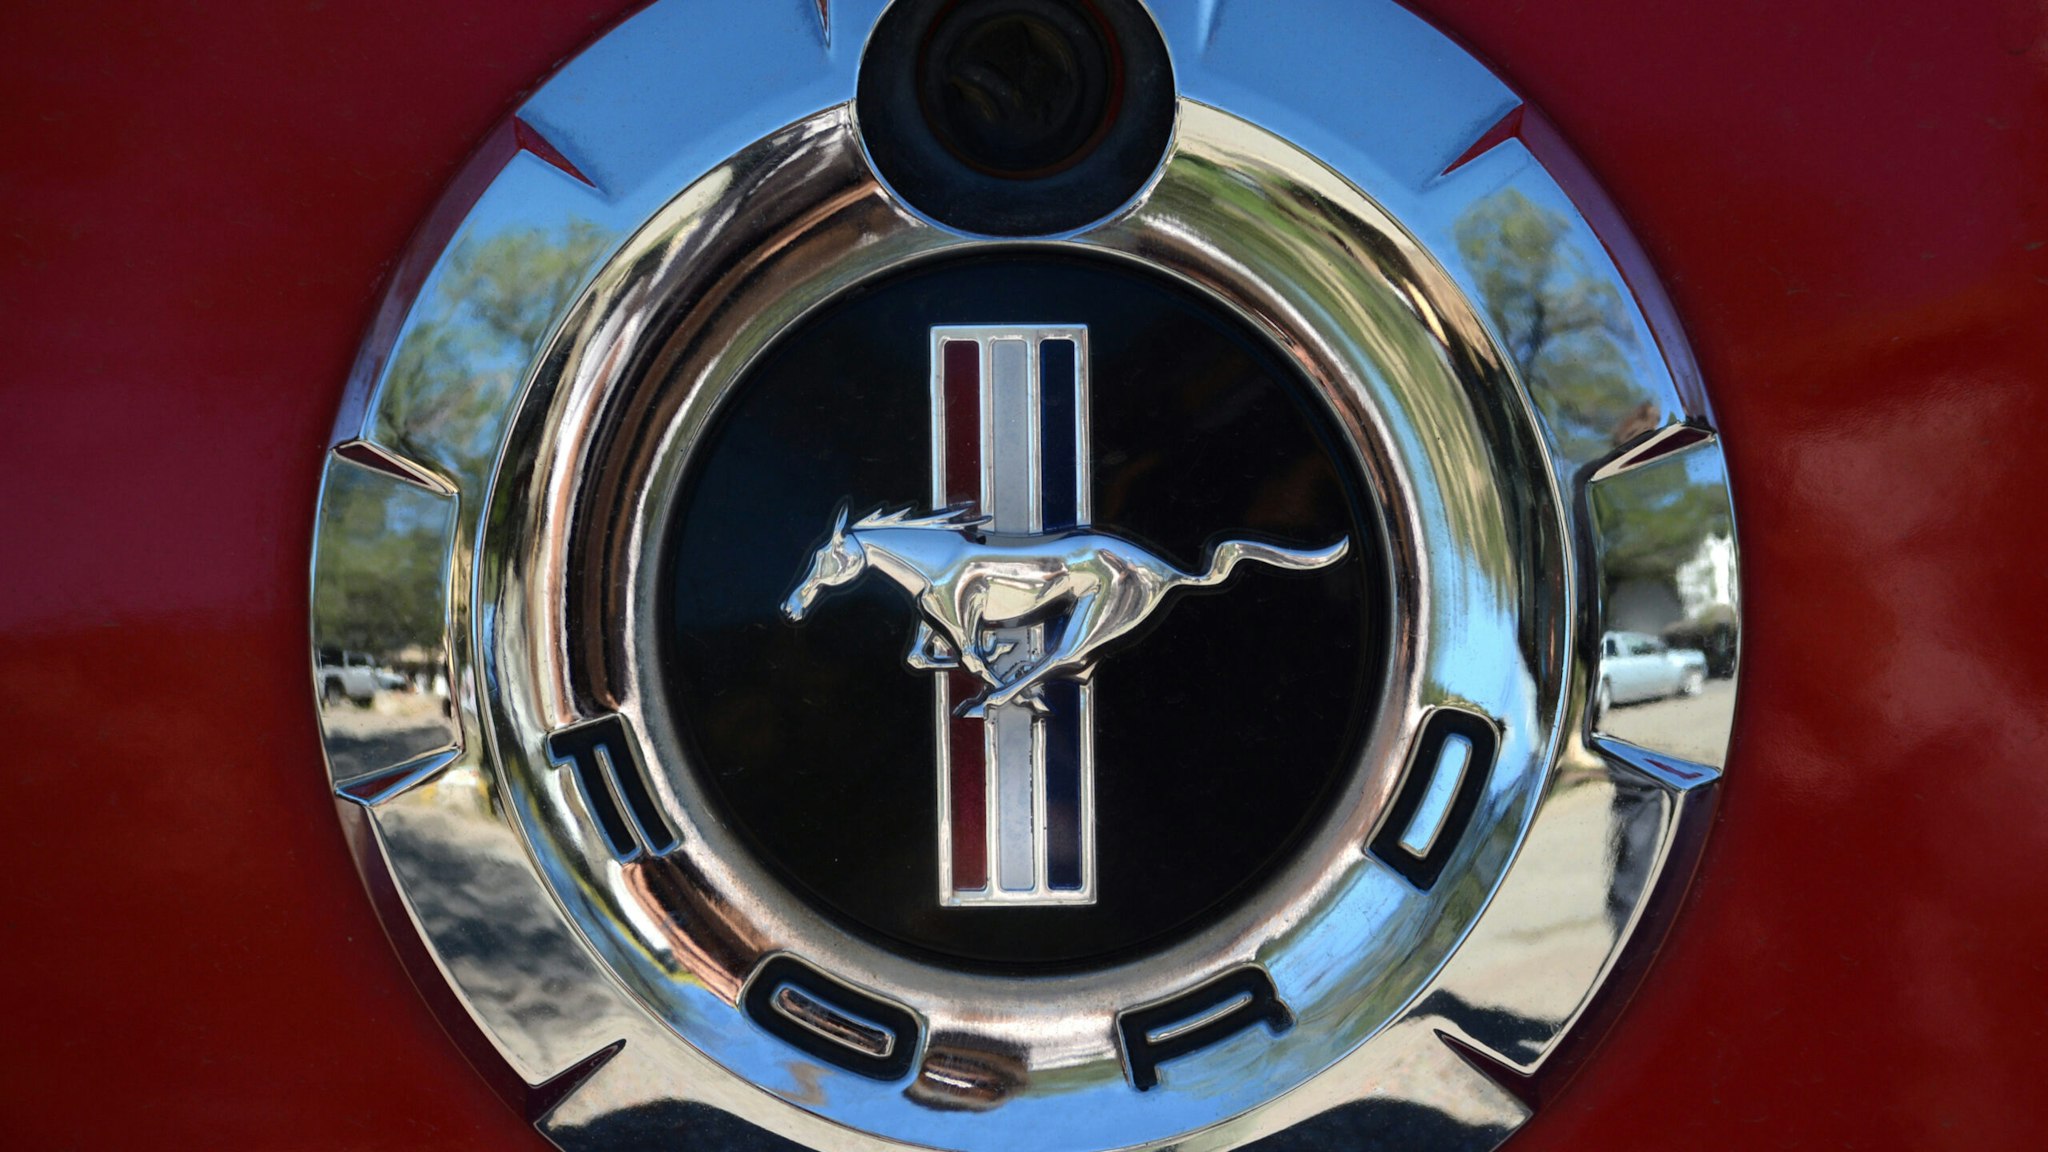 A Ford Mustage logo and emblem and rear-view or backup camera lens on a red Mustang parked in Santa Fe, New Mexico.